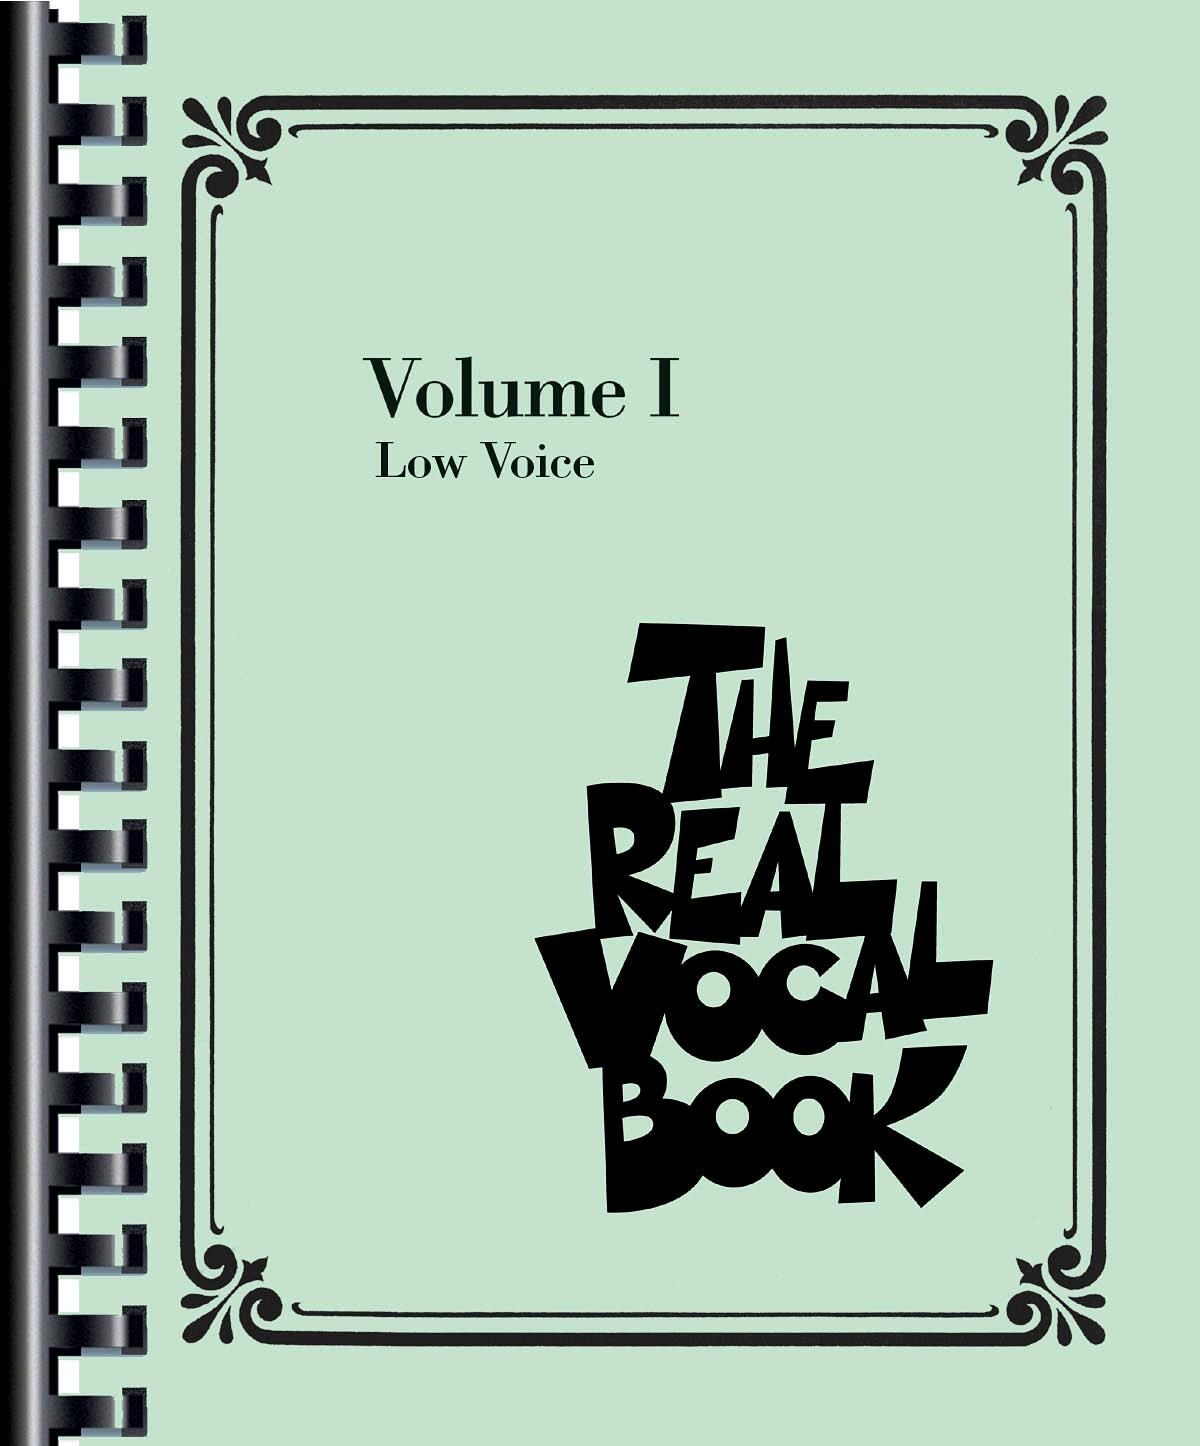 The Real Vocal Book Volume 1 low voice : photo 1